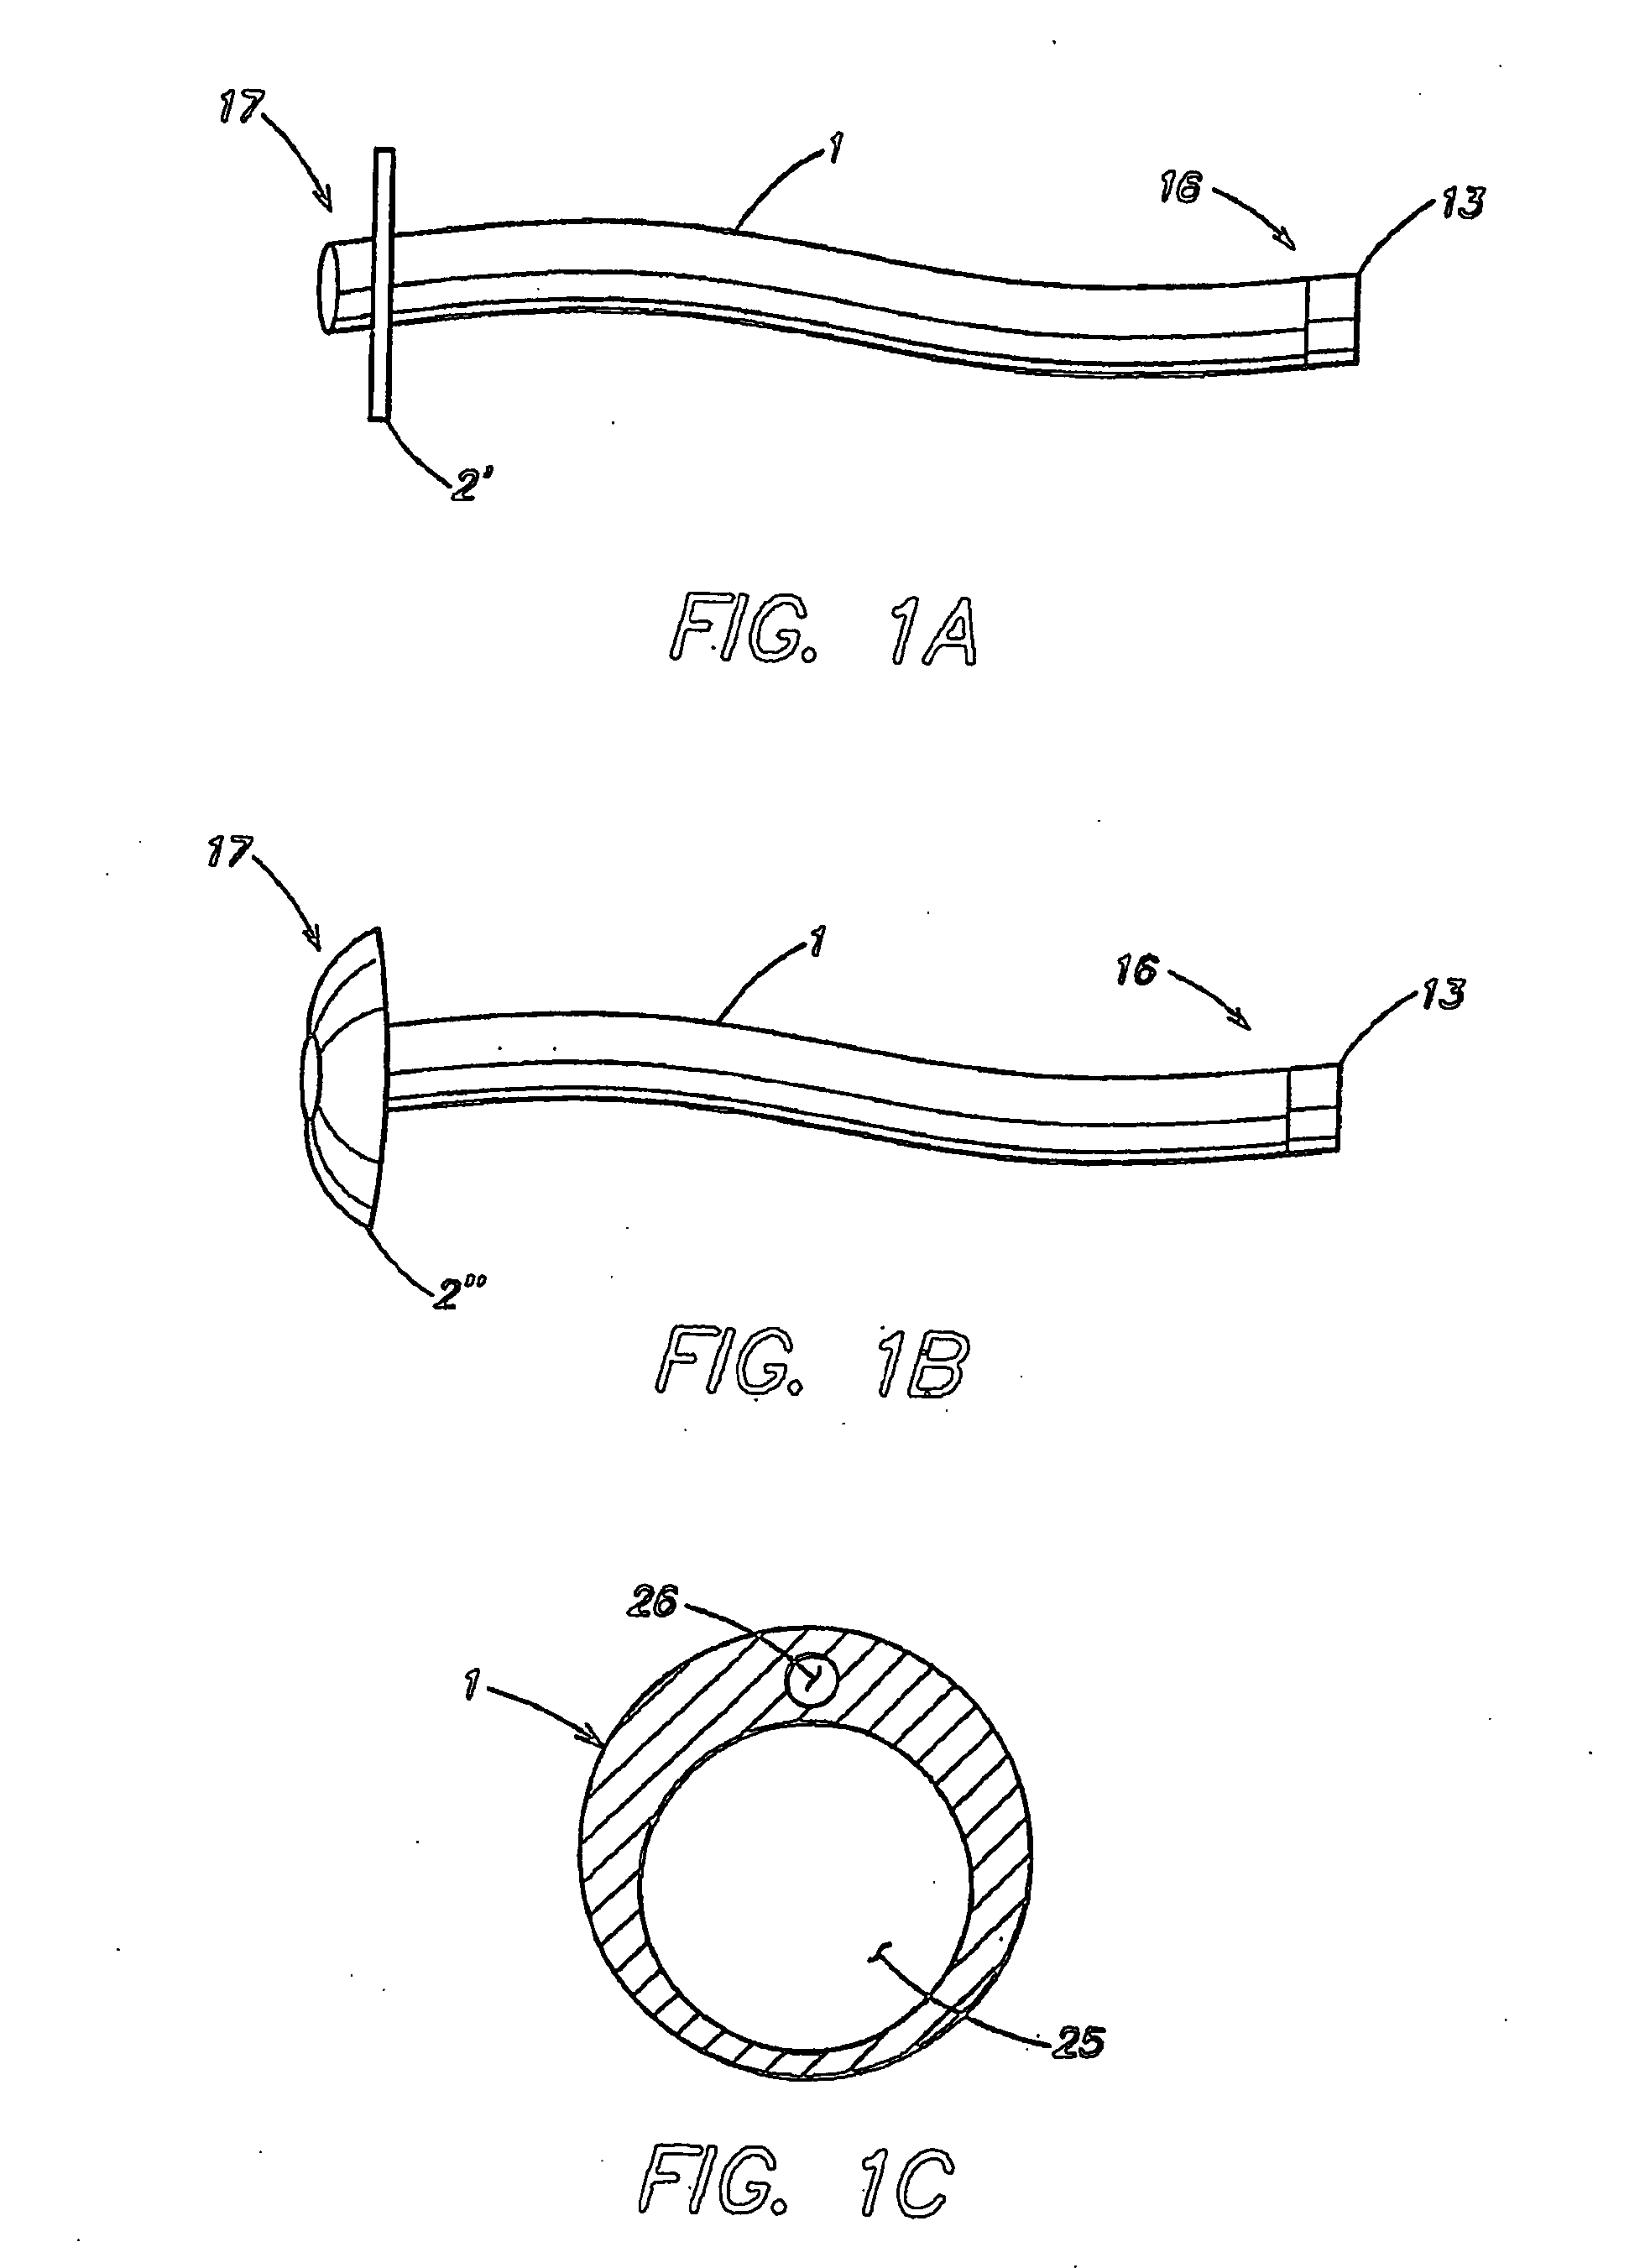 Apparatus for treating obesity by extracting food